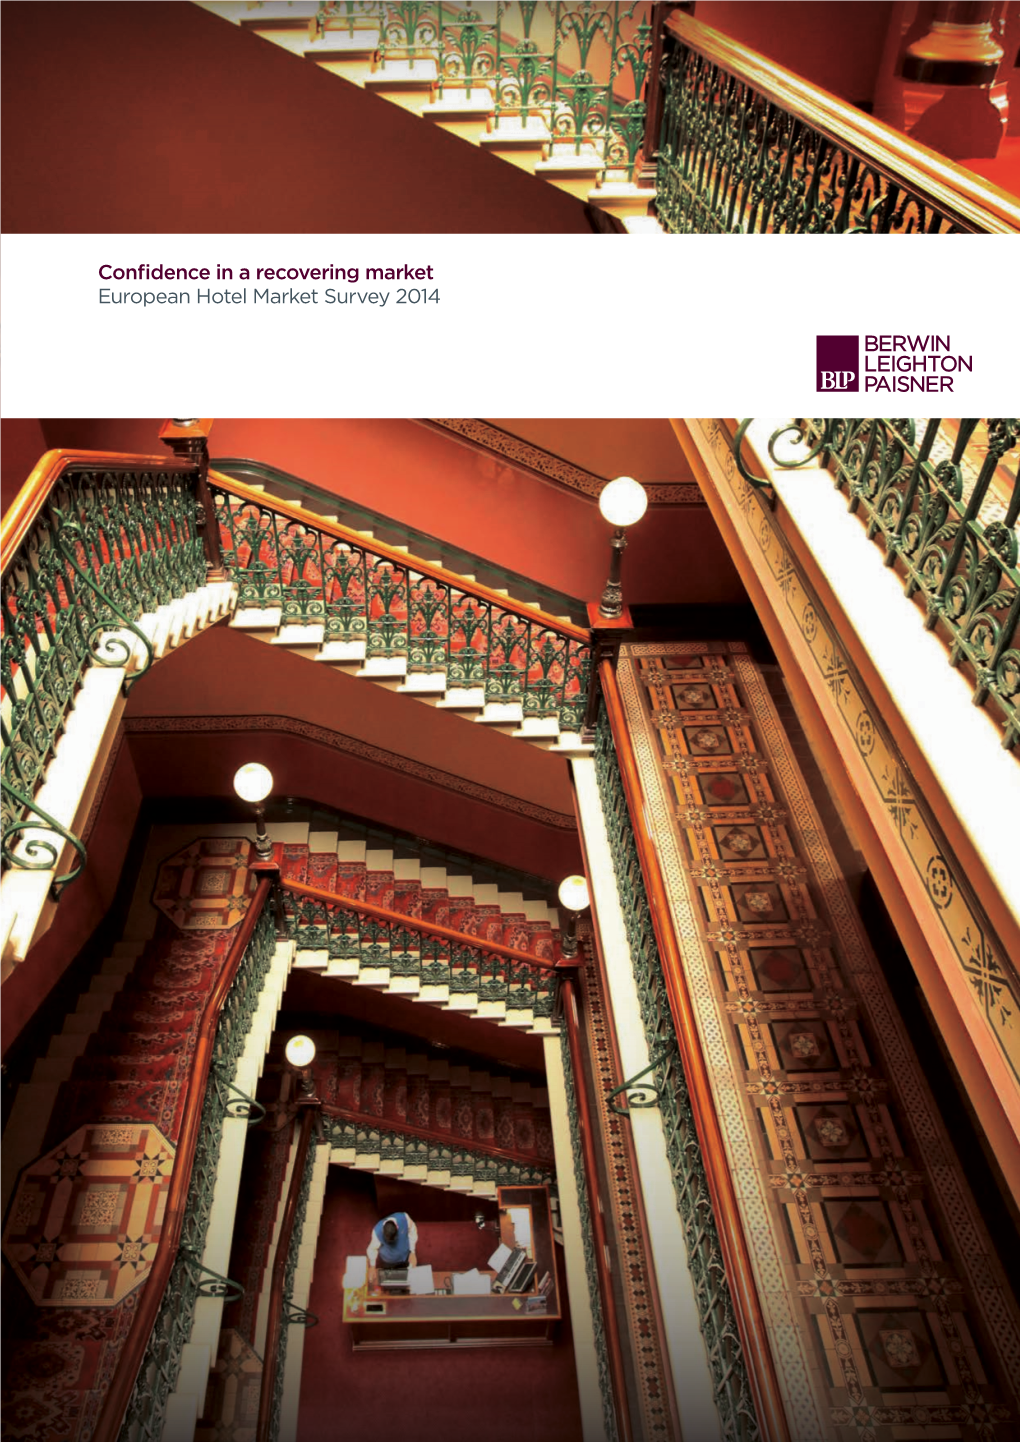 Confidence in a Recovering Market European Hotel Market Survey 2014 Contents